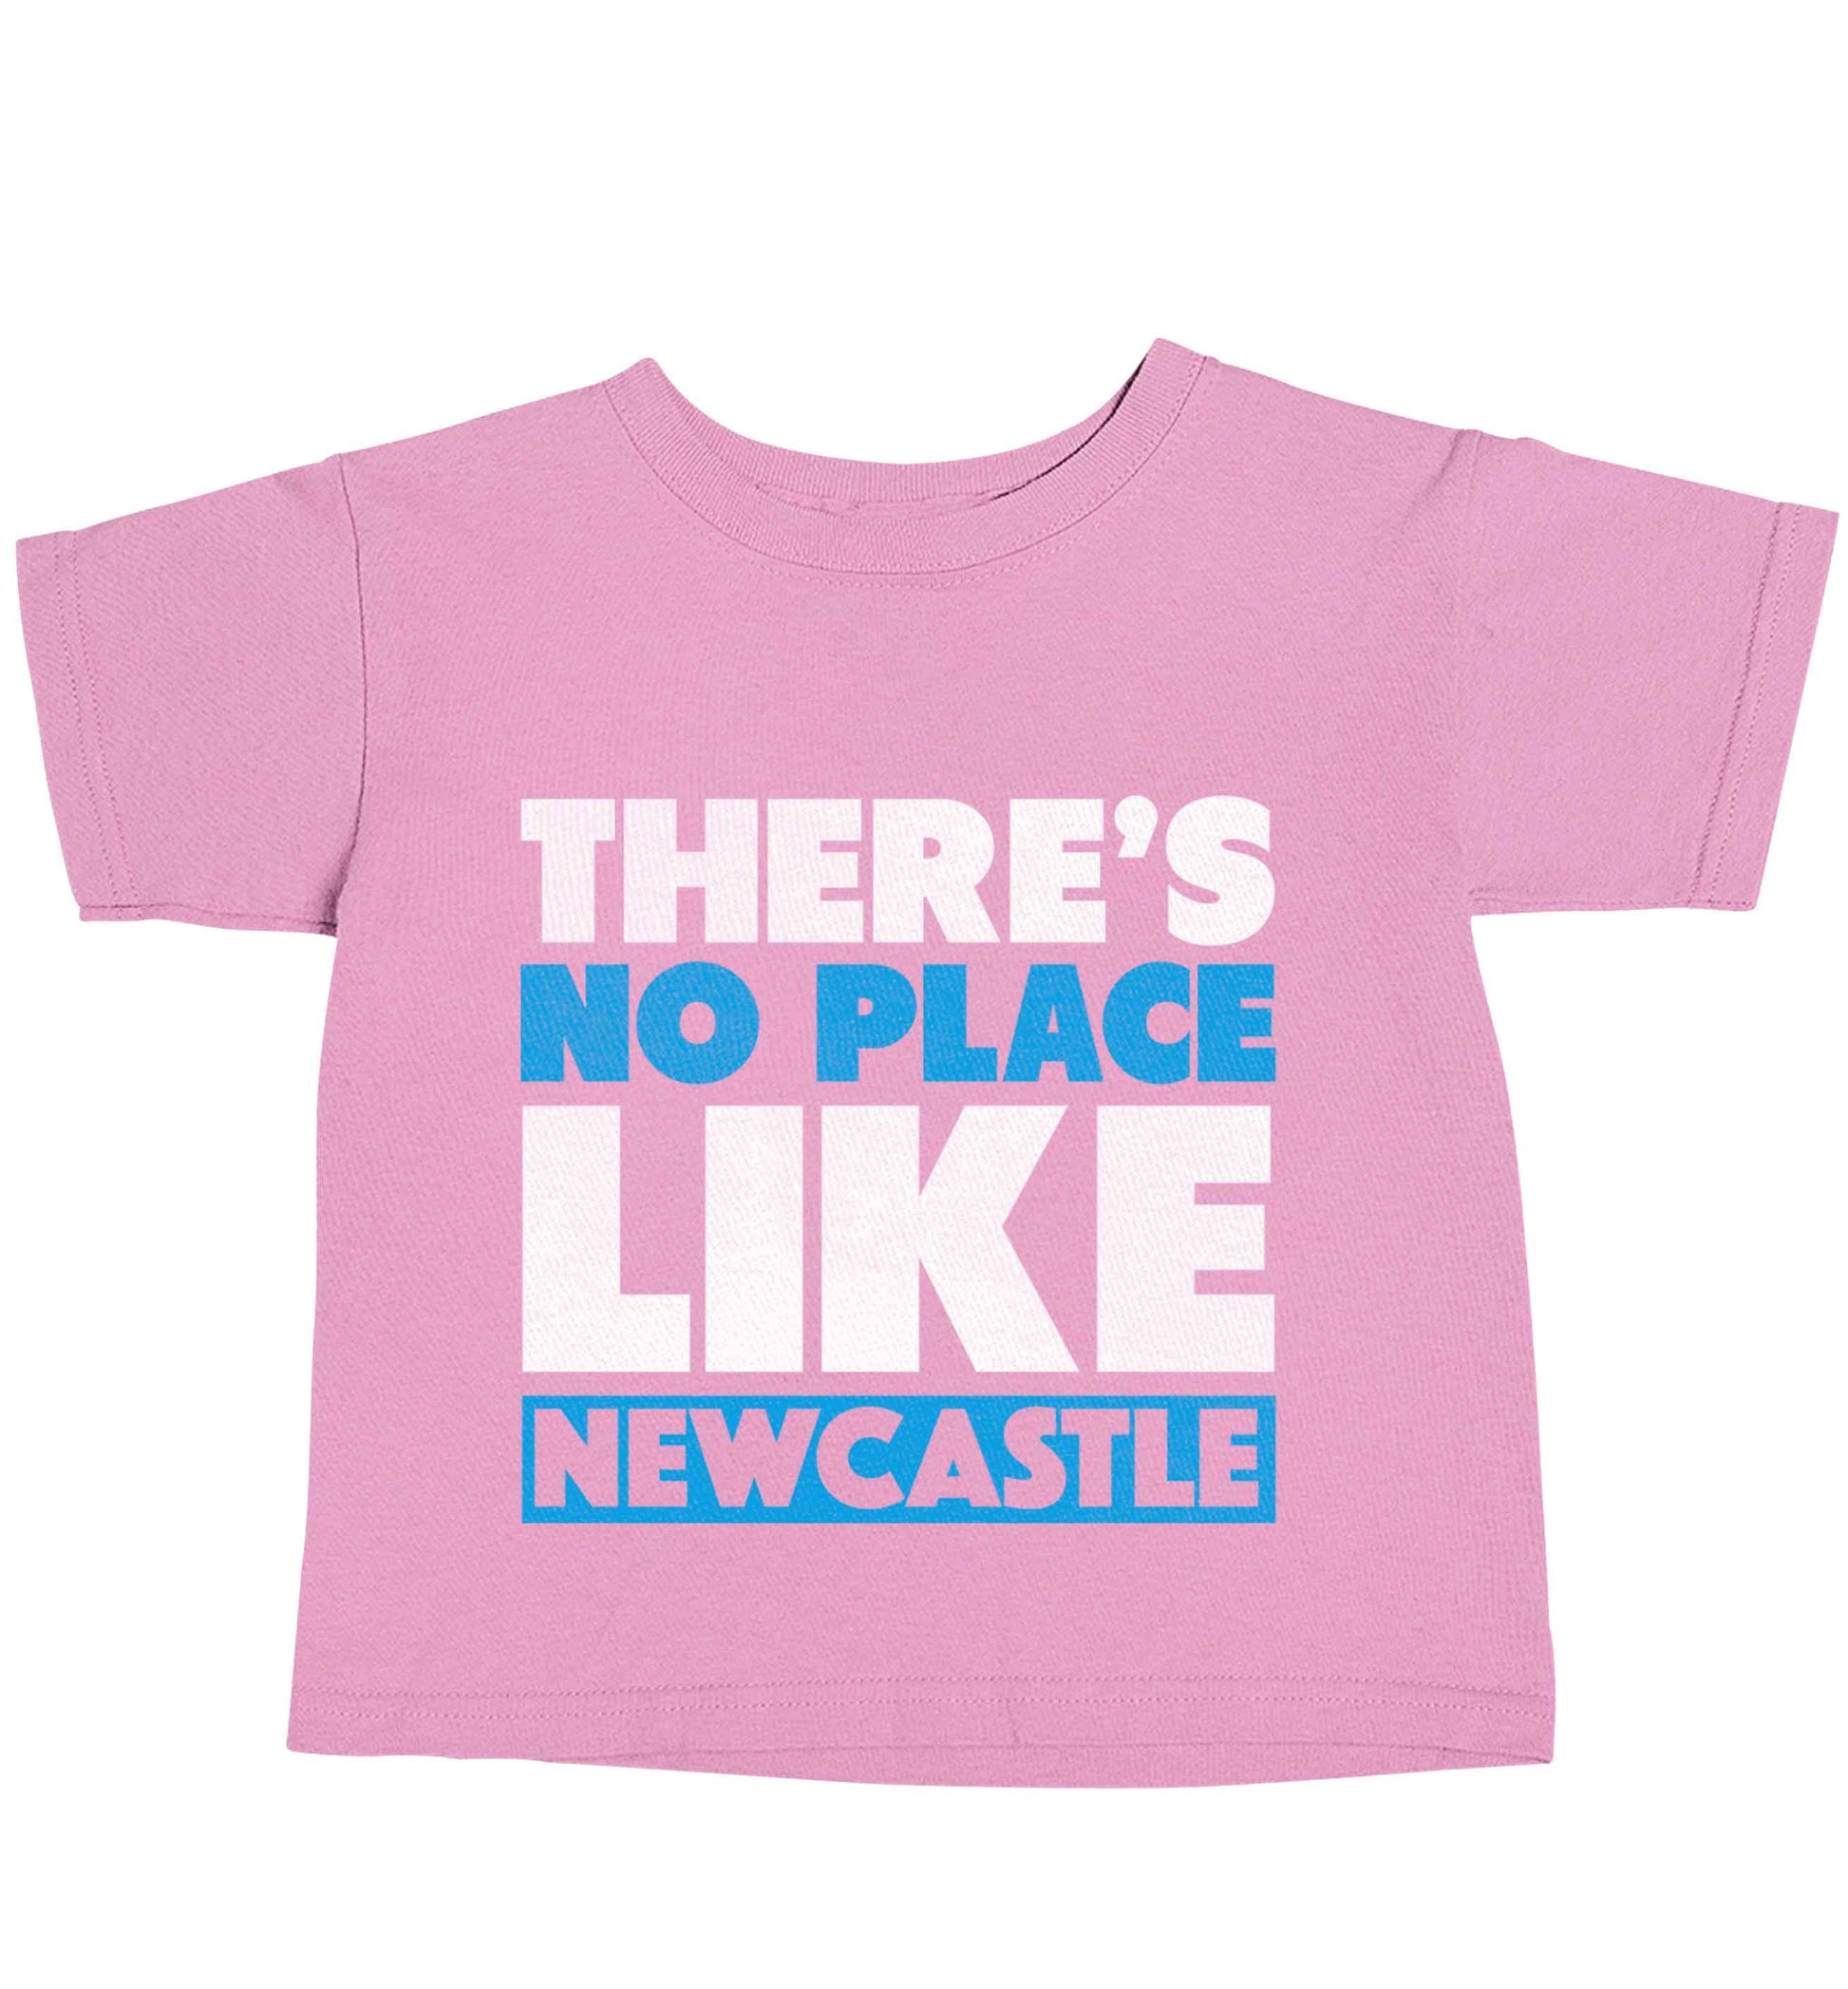 There's no place like Newcastle light pink baby toddler Tshirt 2 Years